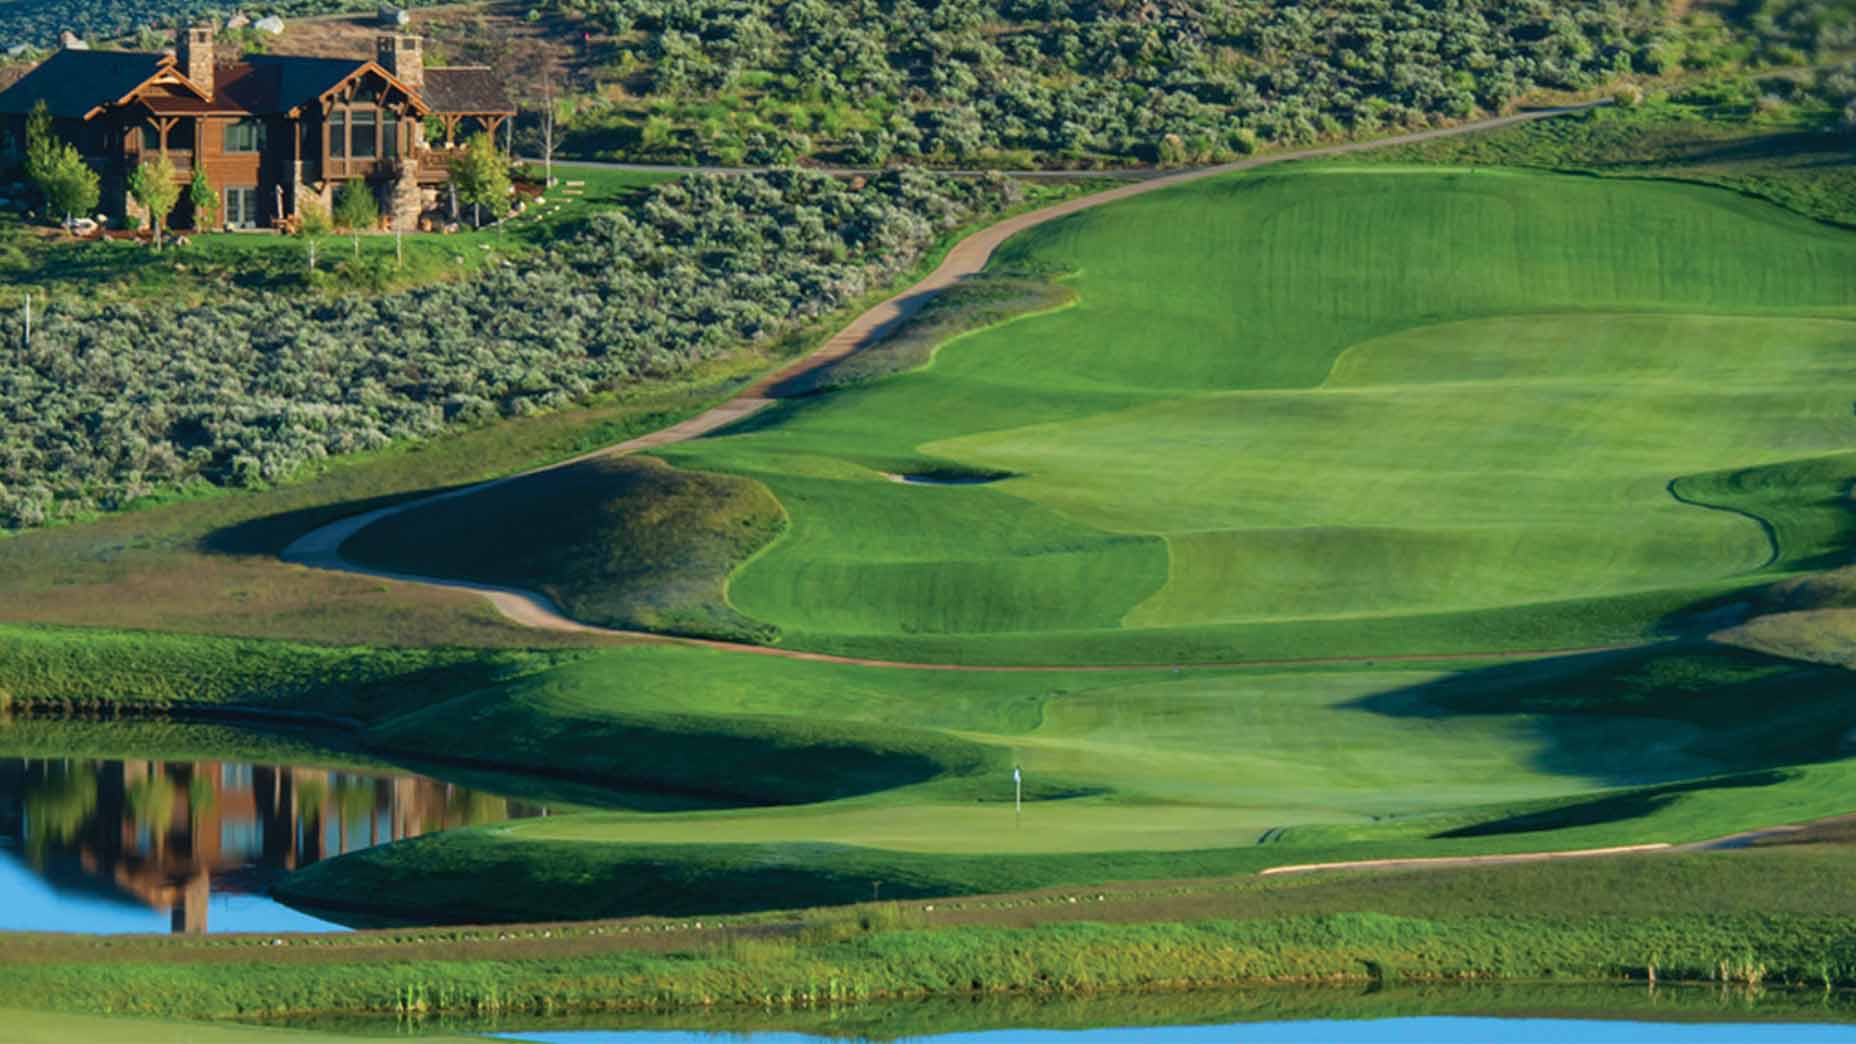 Best golf courses in Utah, according to GOLF Magazine’s expert course raters